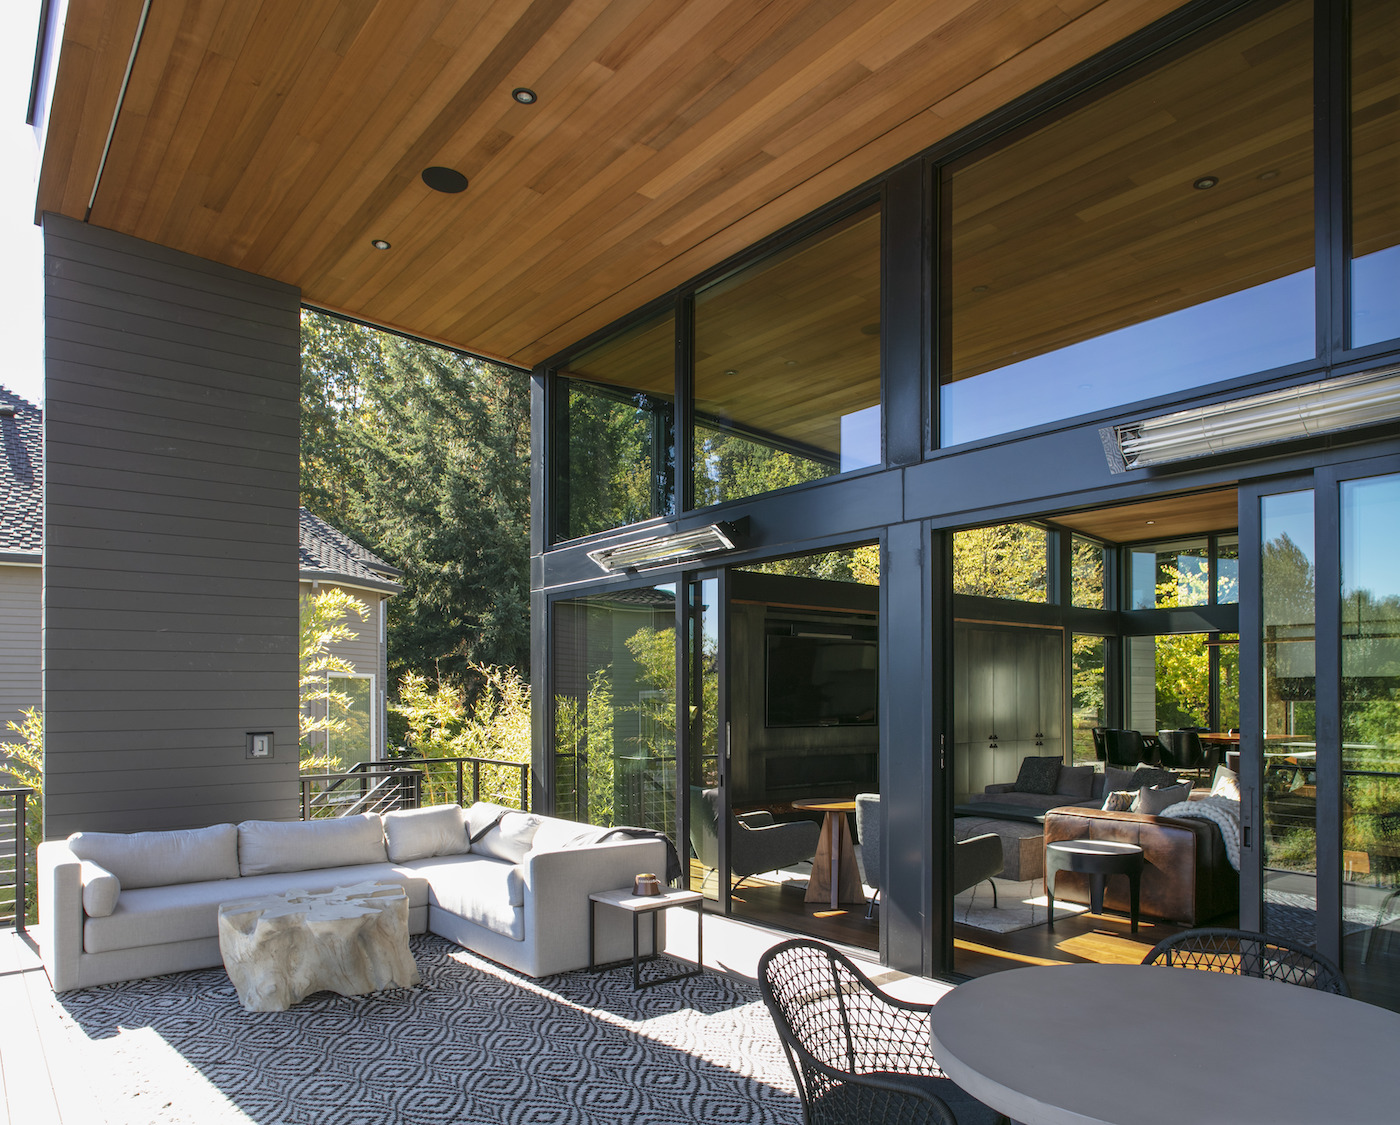 Design and amenities remain an important consideration to Net Zero home buyers. Image courtesy JELD-WEN